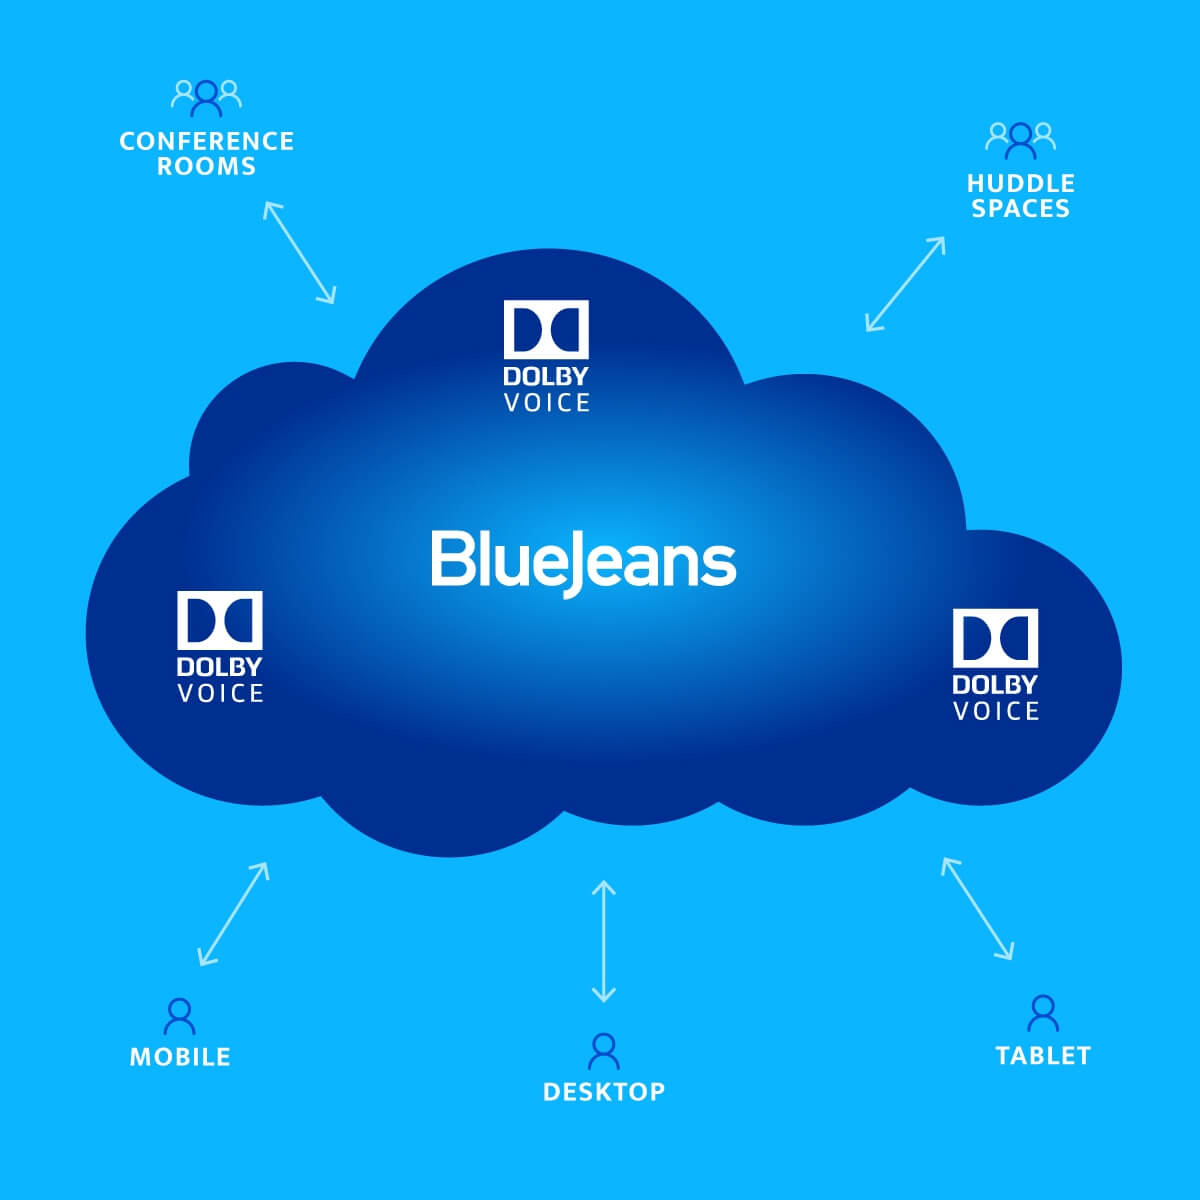 A cloud with BlueJeans and Dolby Voice in the middle with arrows showcasing its application in conference rooms, huddle spaces, tablets, desktop, and mobile devices.